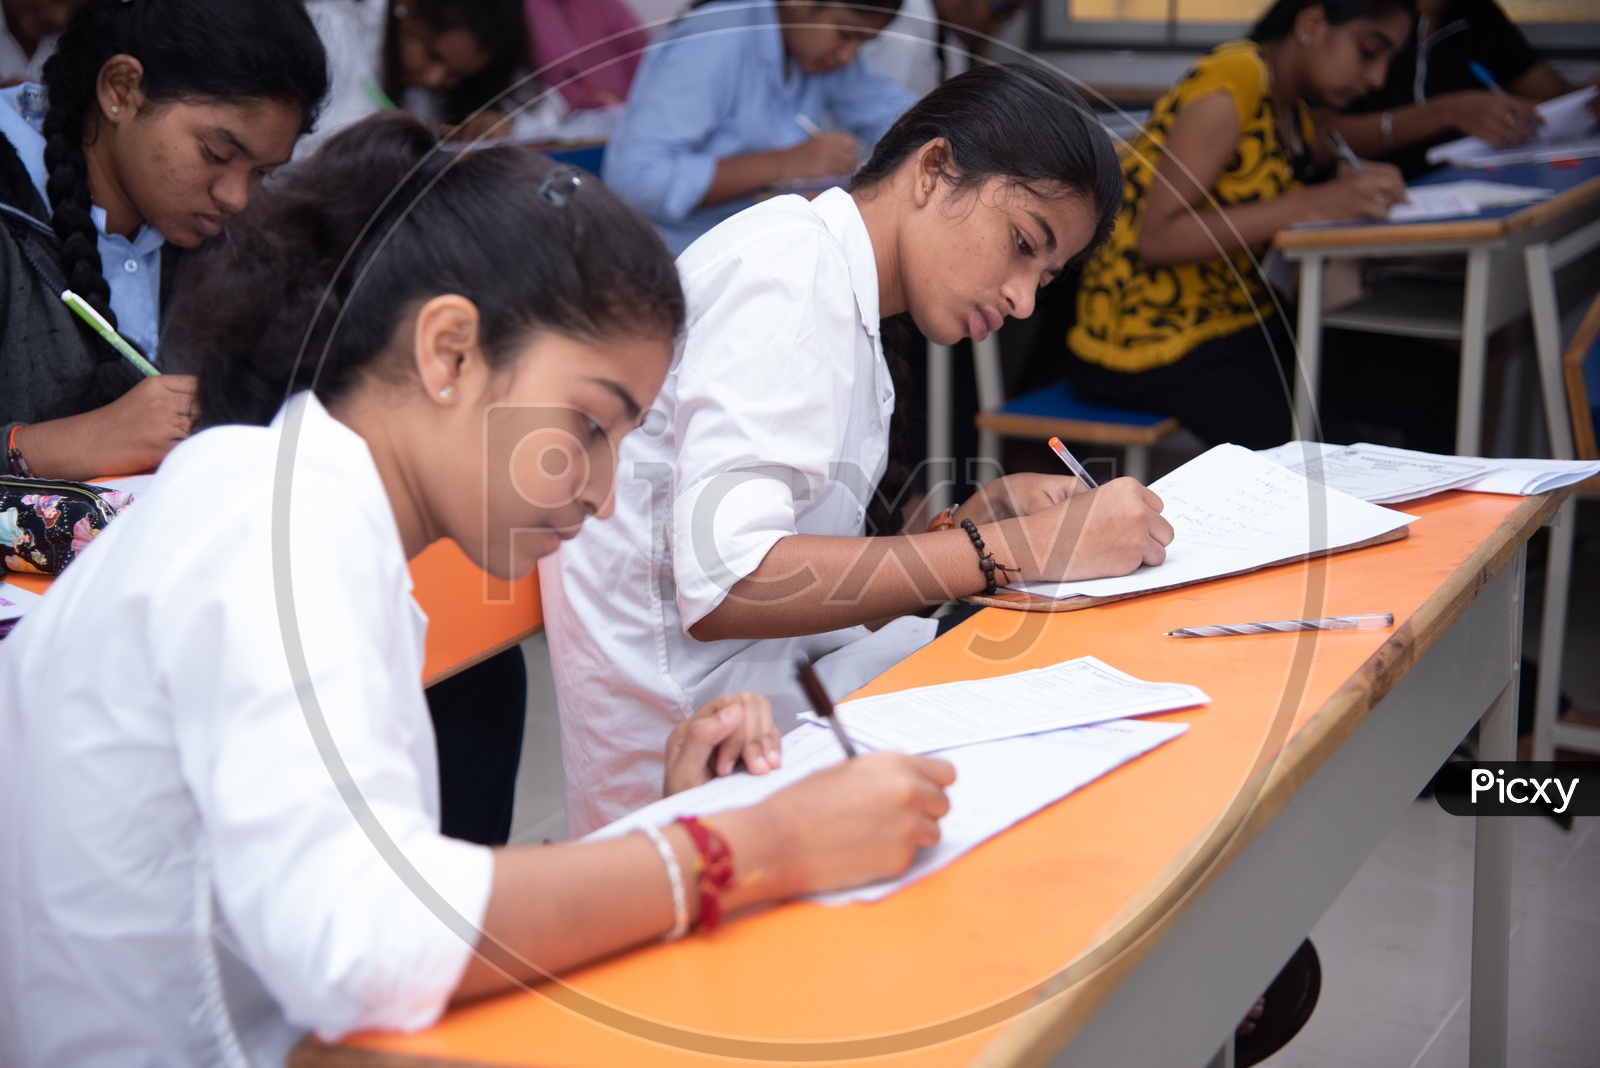 Girl students writing exam at an educational institute.